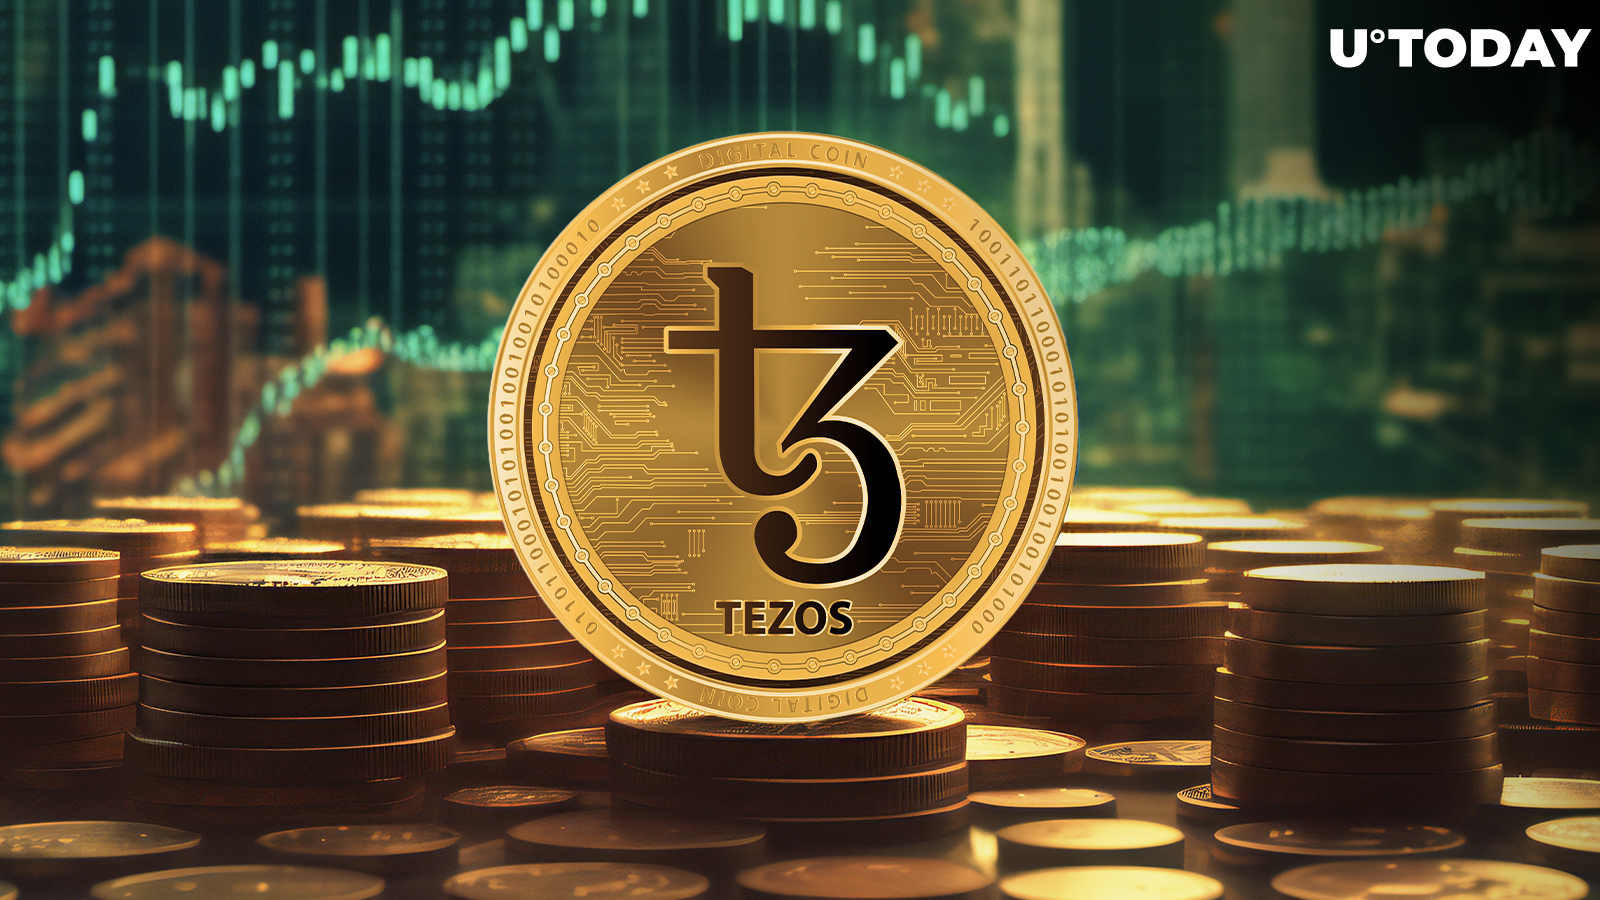 Tezos (XTZ) Shows 937% Increase in Volume as Price Jumps; Here's Why